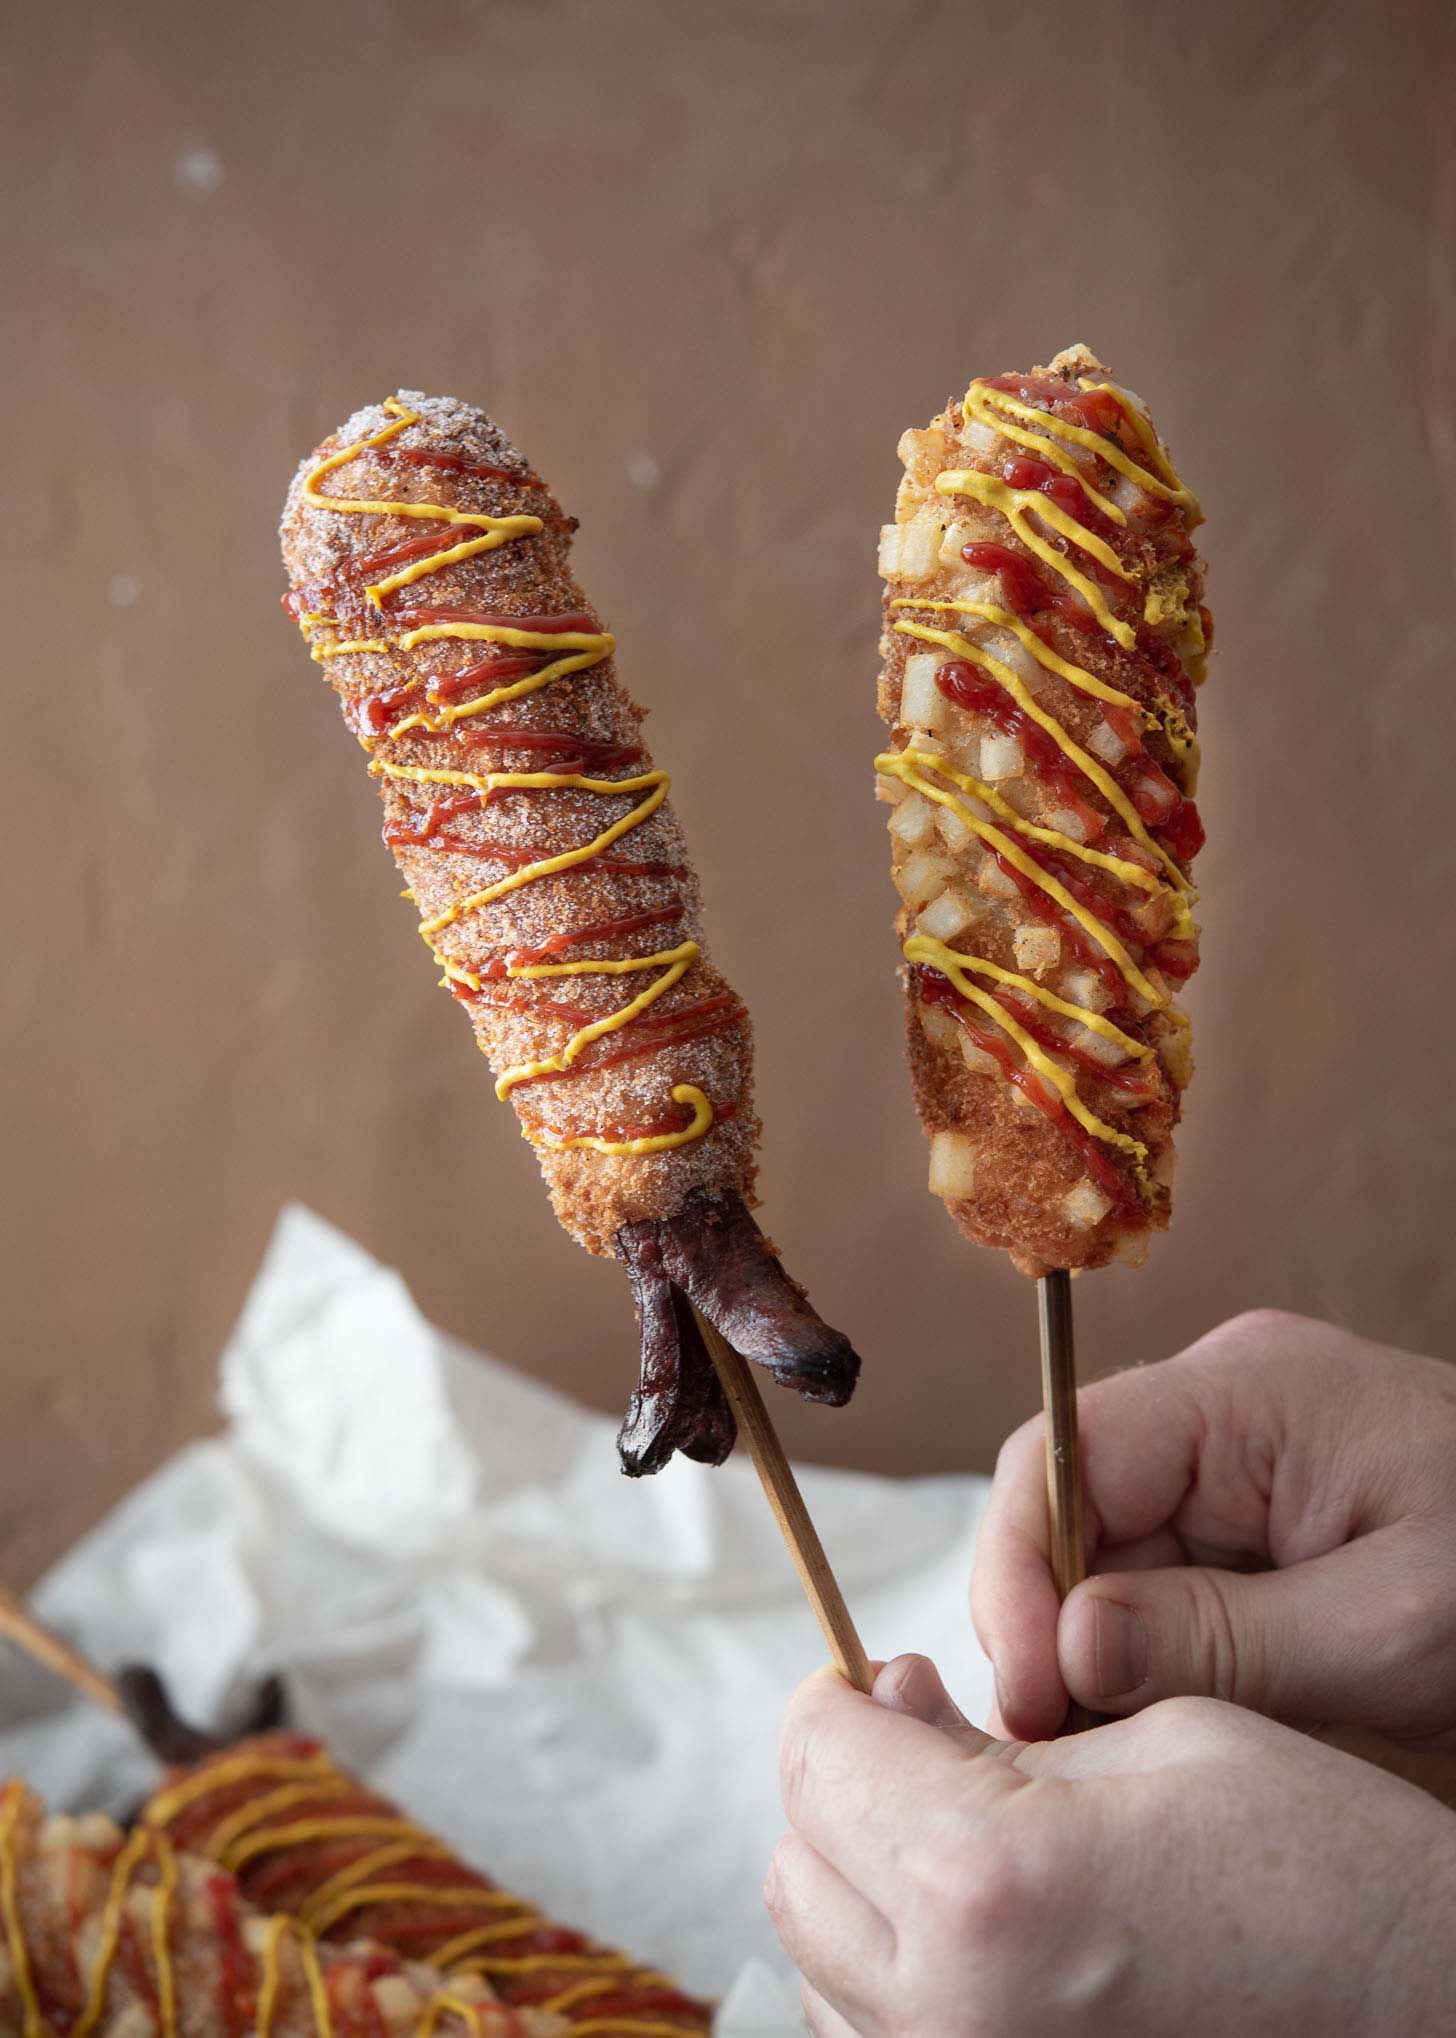 Two Korean corn dogs on sticks held up.